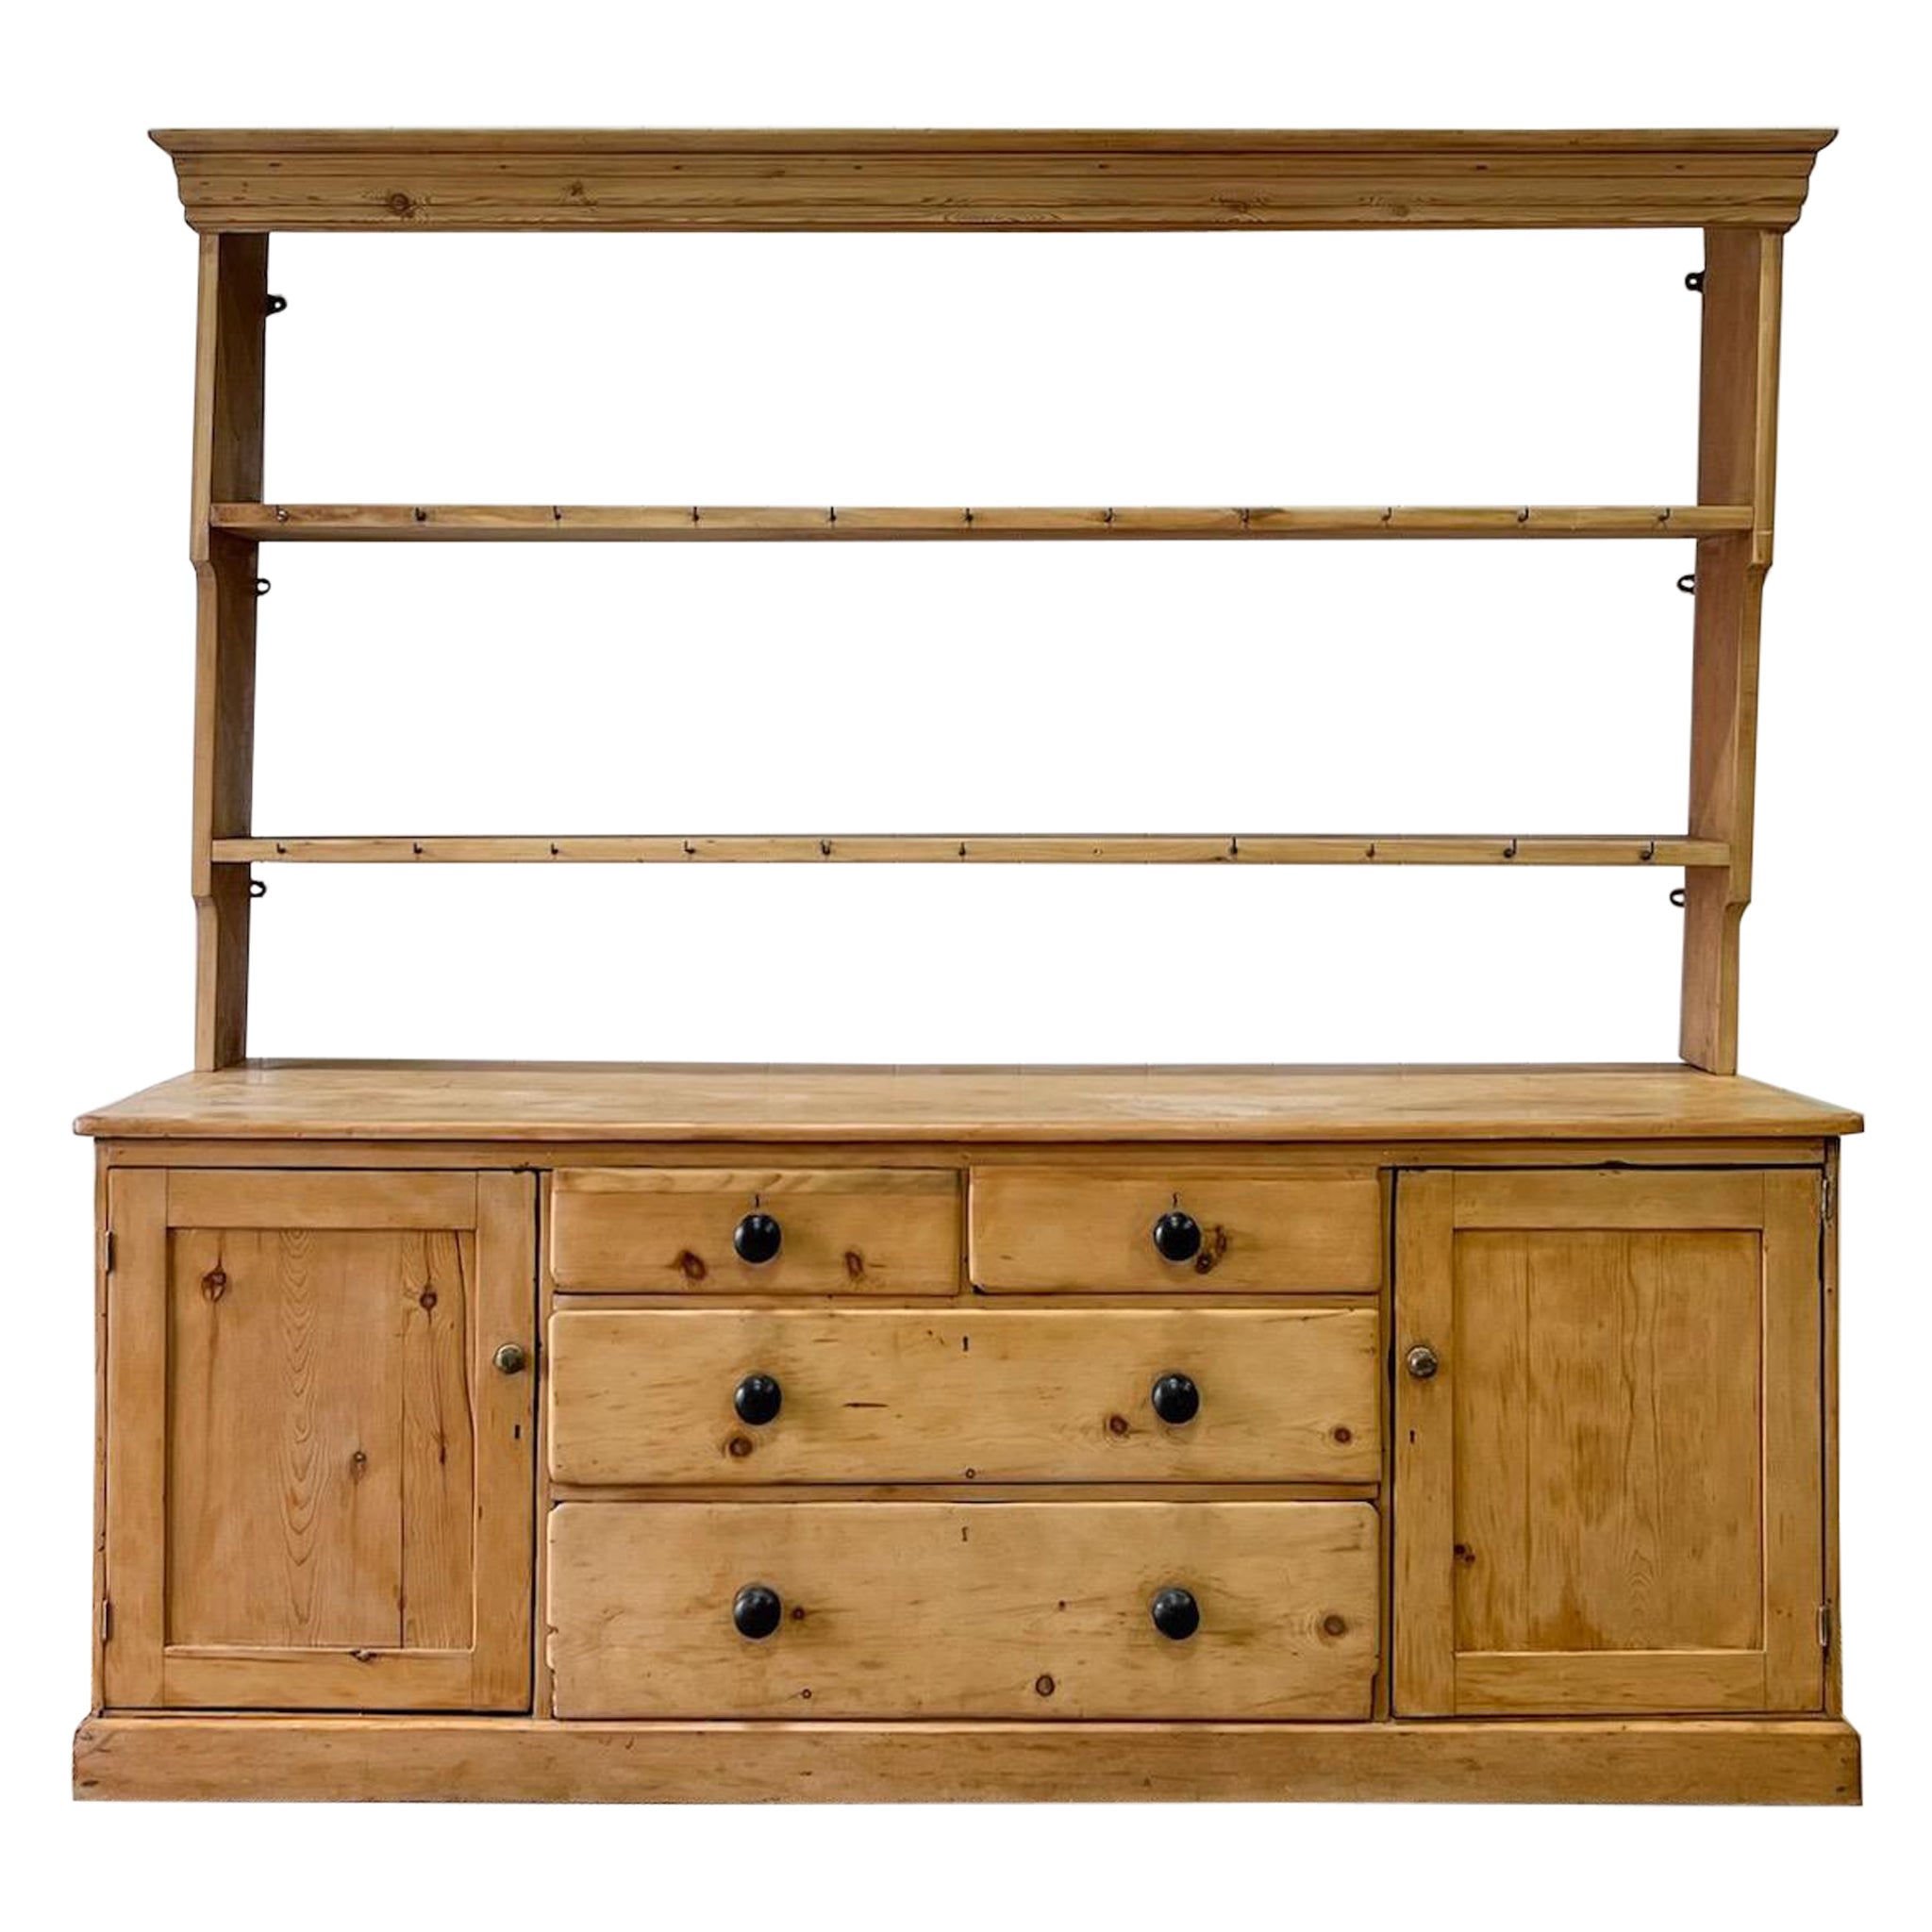 An Early 19th Century Monumental Pine Welsh Dresser or Cupboard